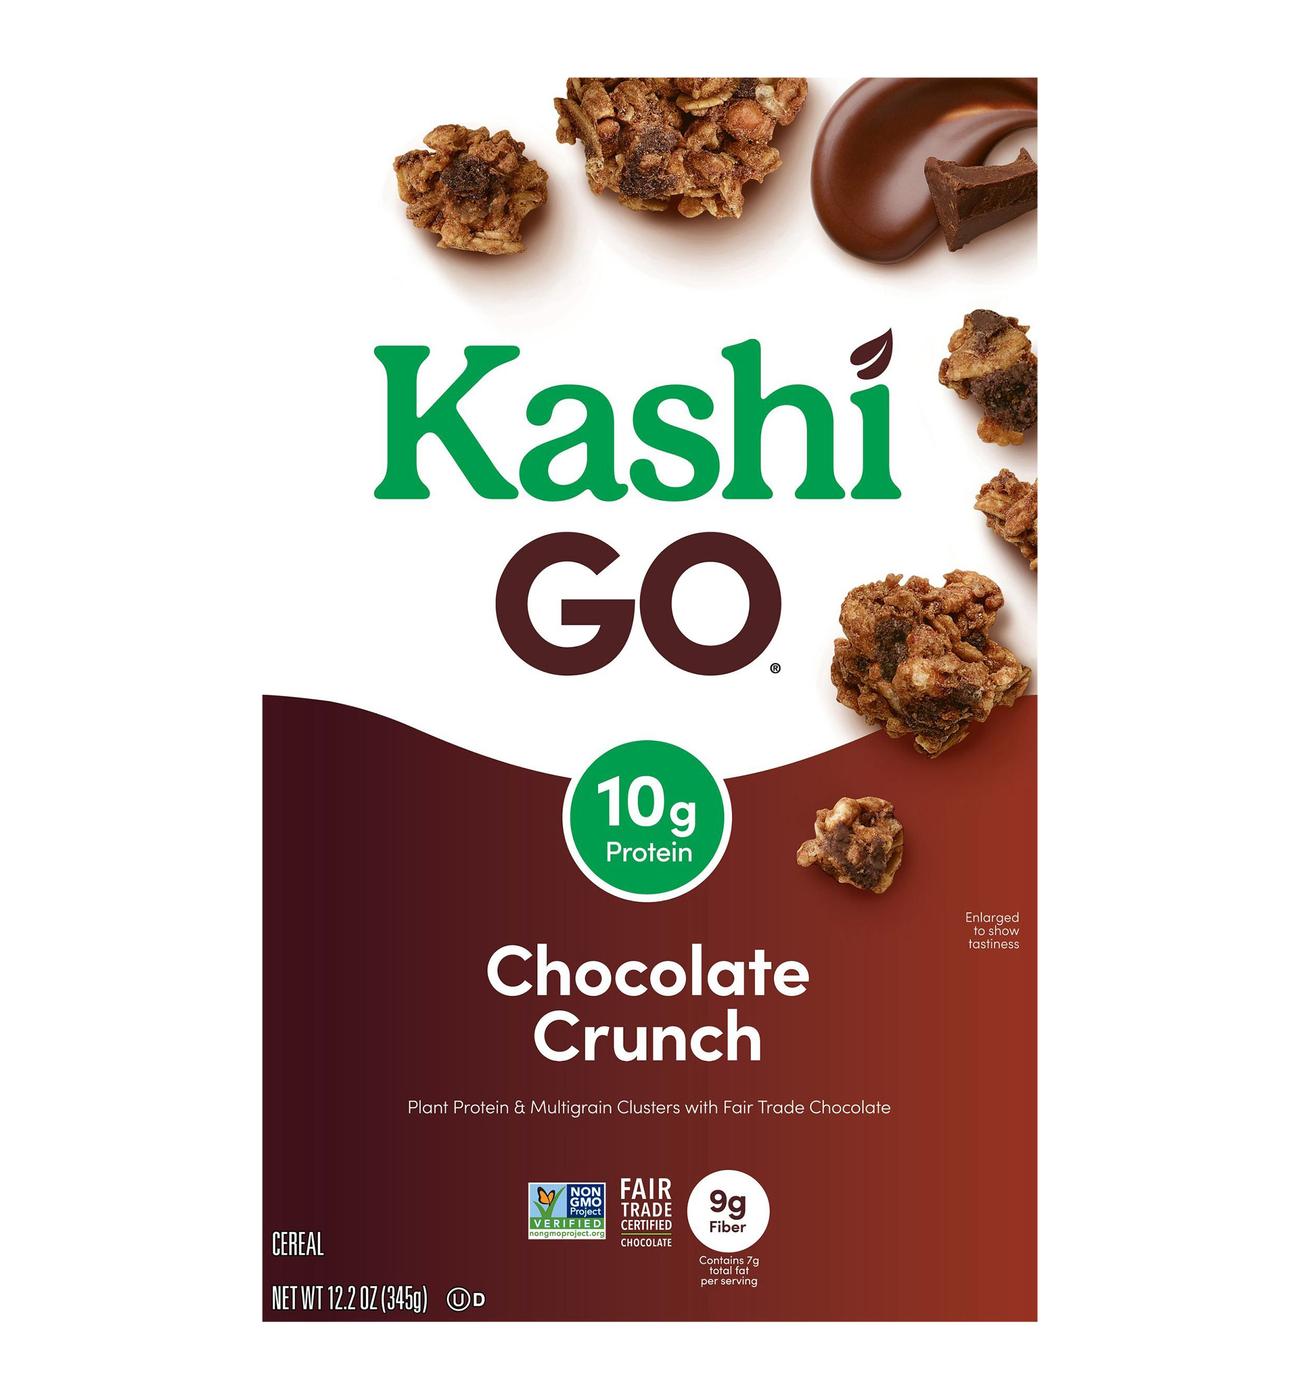 Kashi GO Chocolate Crunch Cereal; image 1 of 6